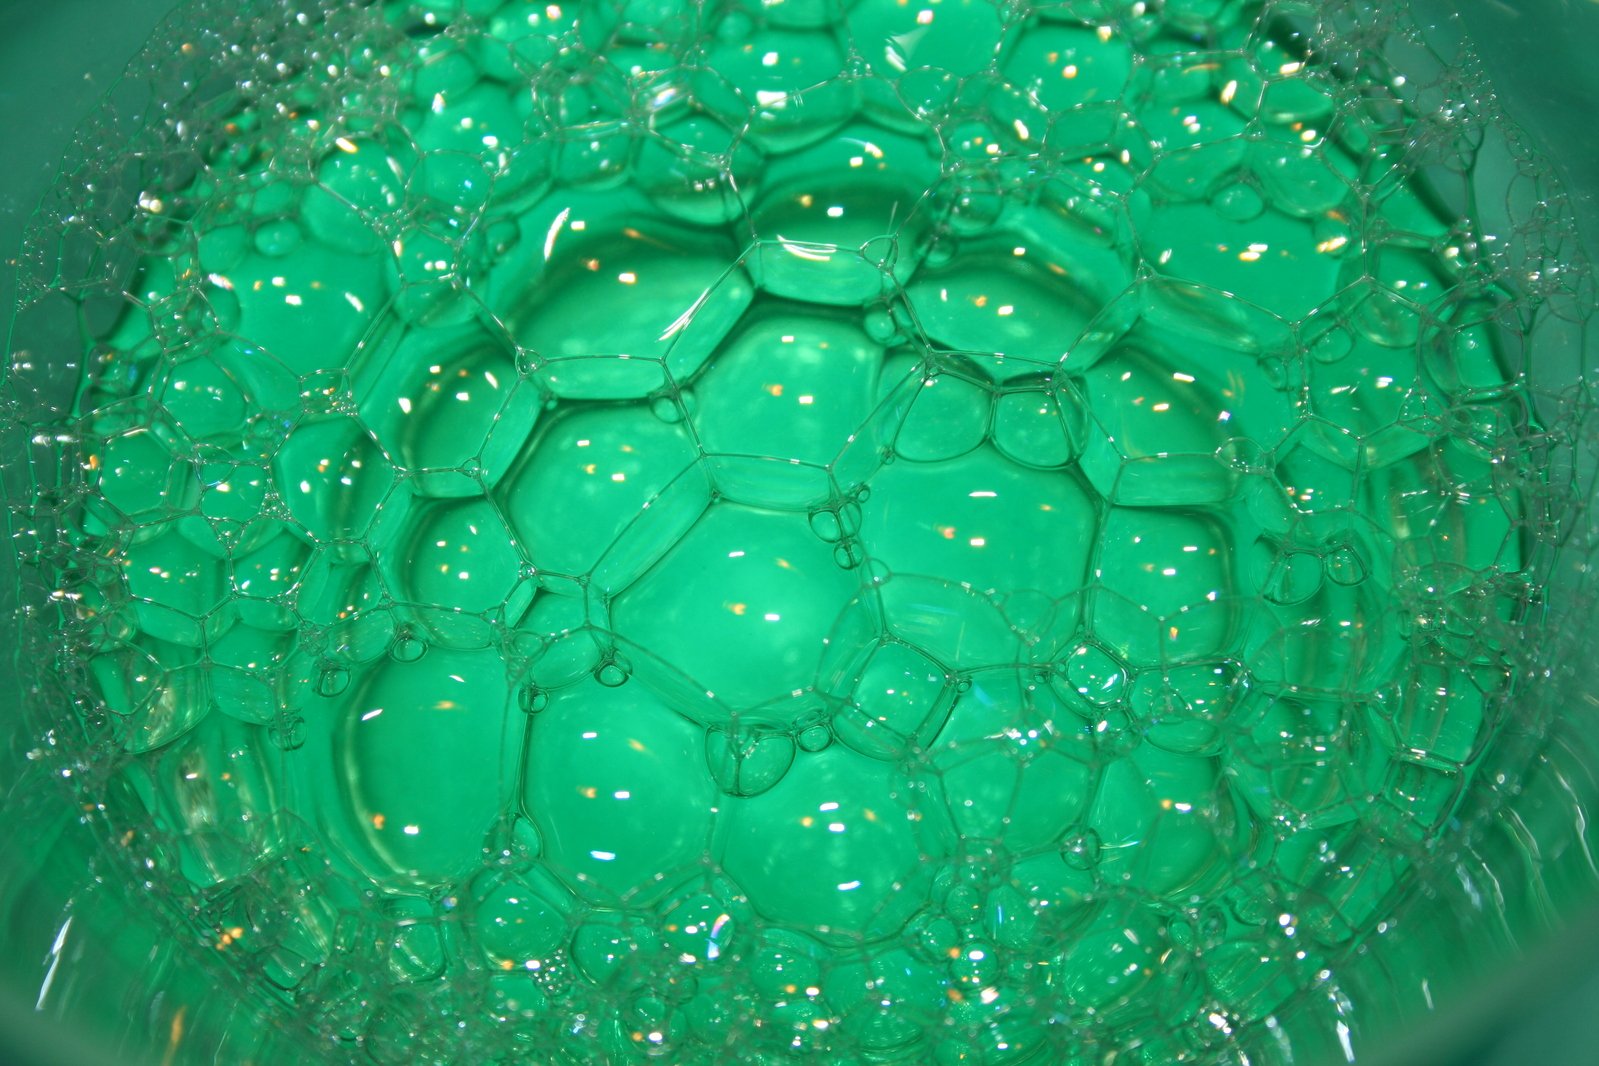 a very green bowl filled with lots of water